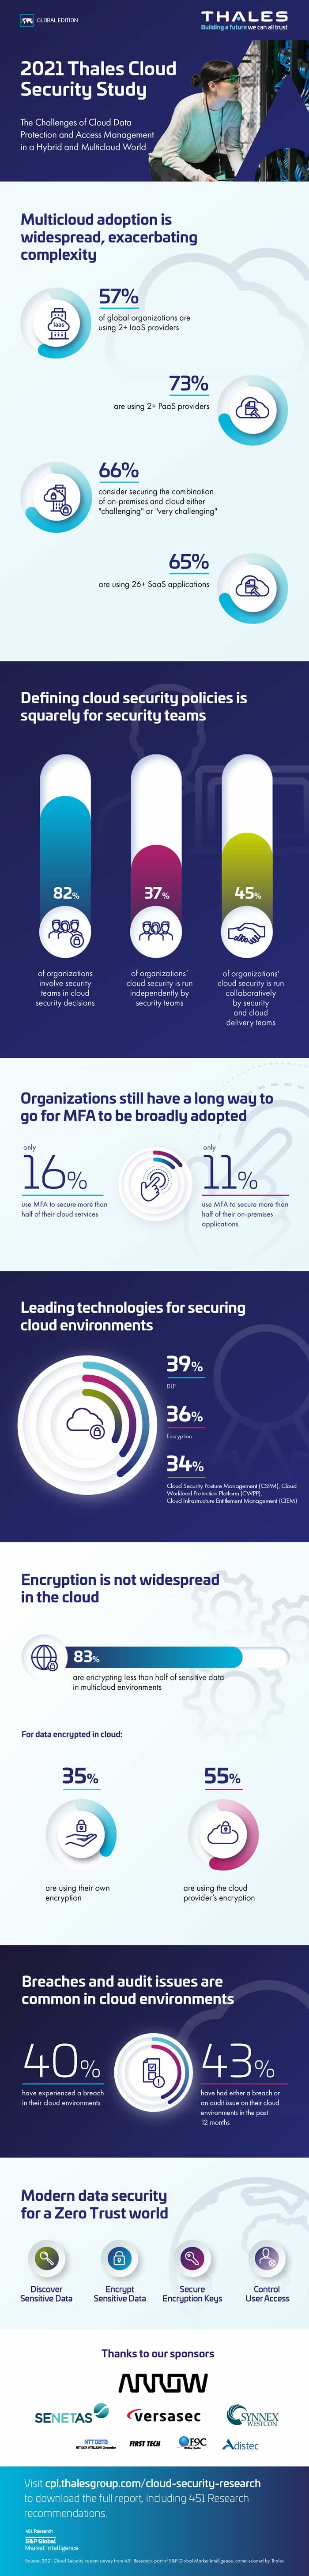 2021 Thales cloud security study infographic - source and full version in PDF